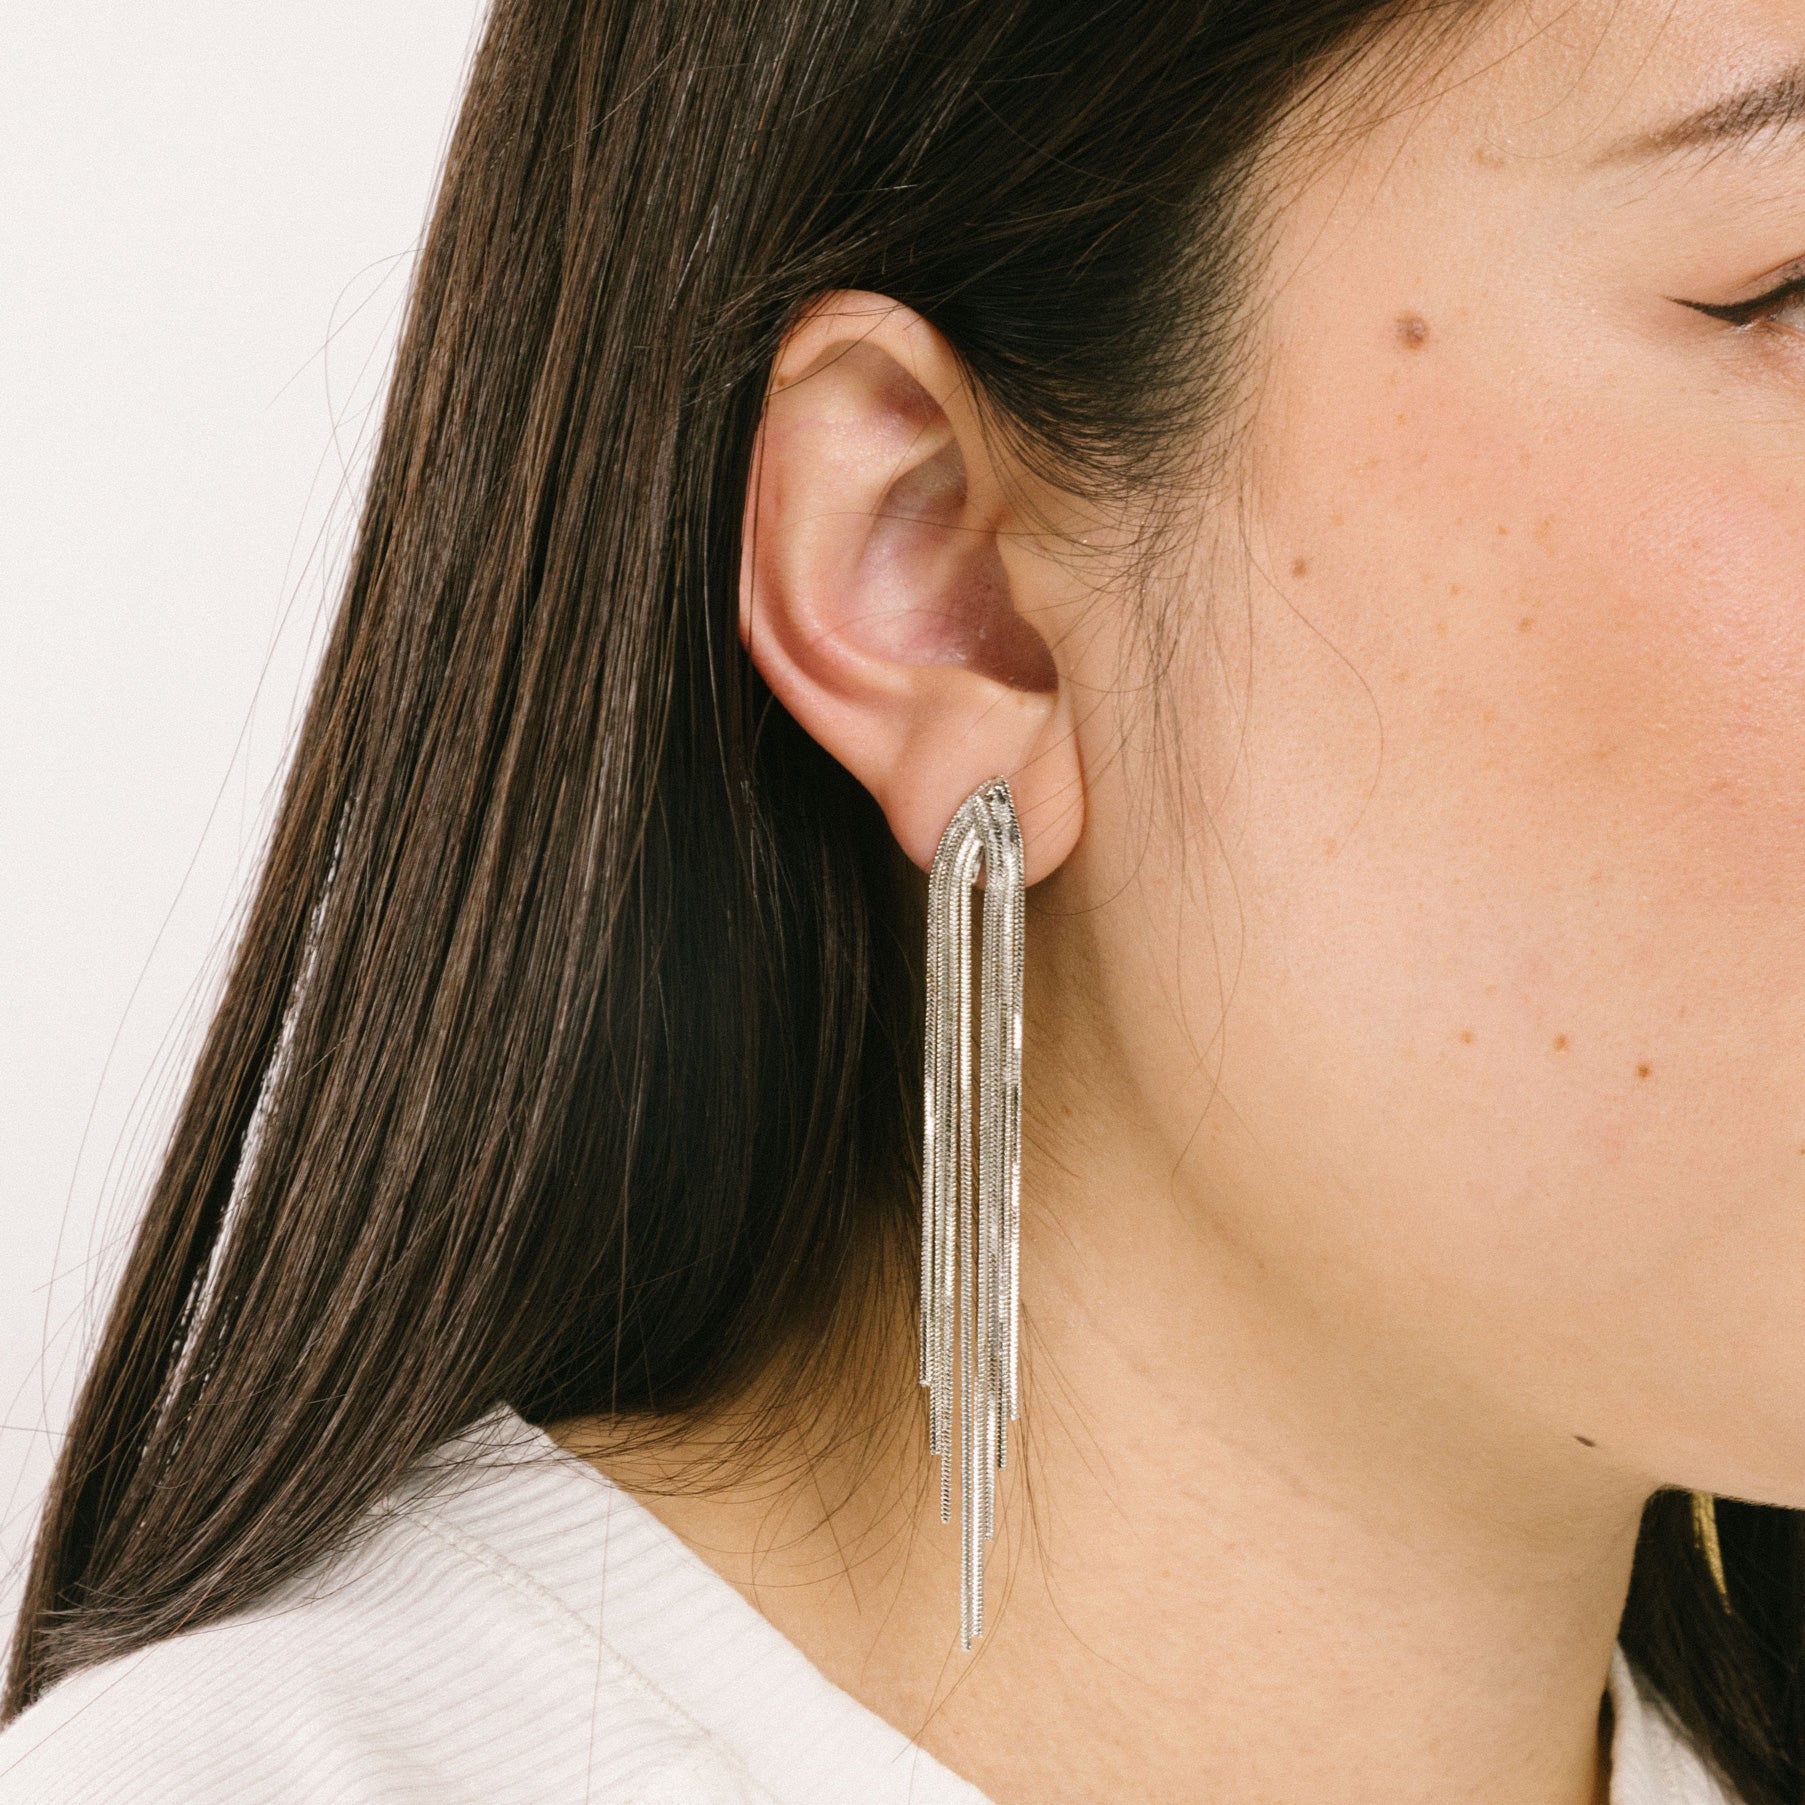 A model wearing the Chain Chandelier Clip On Earrings feature removable rubber padding, making them an optimal choice for all ear types. Whether you have thick/large, sensitive, small/thin or stretched/healing ears, this single pair can provide secure, yet comfortable wear.